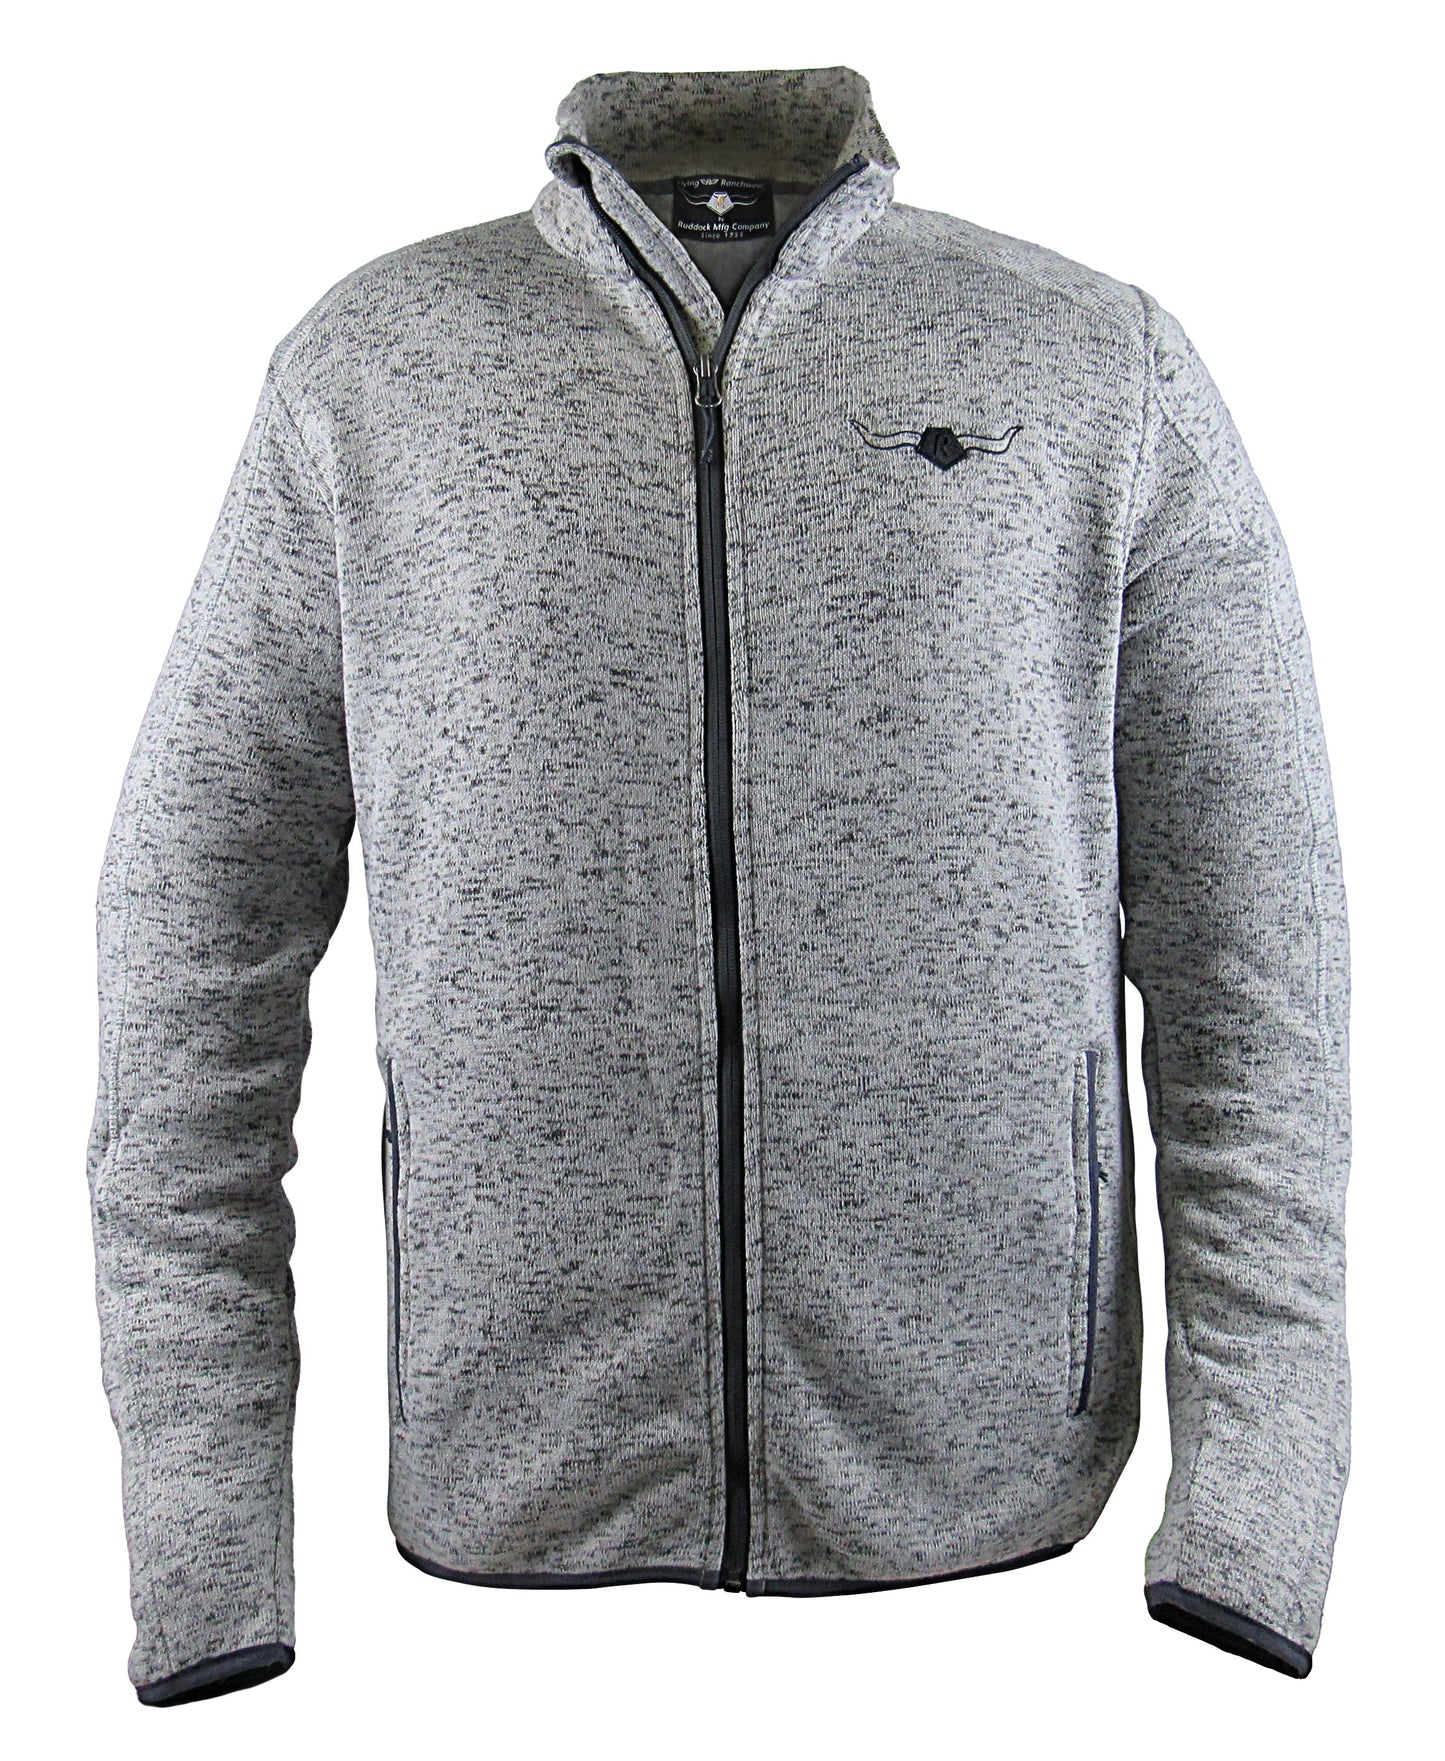 Fleece jacket with pockets and Flying R embroidery on chest in medium gray heather